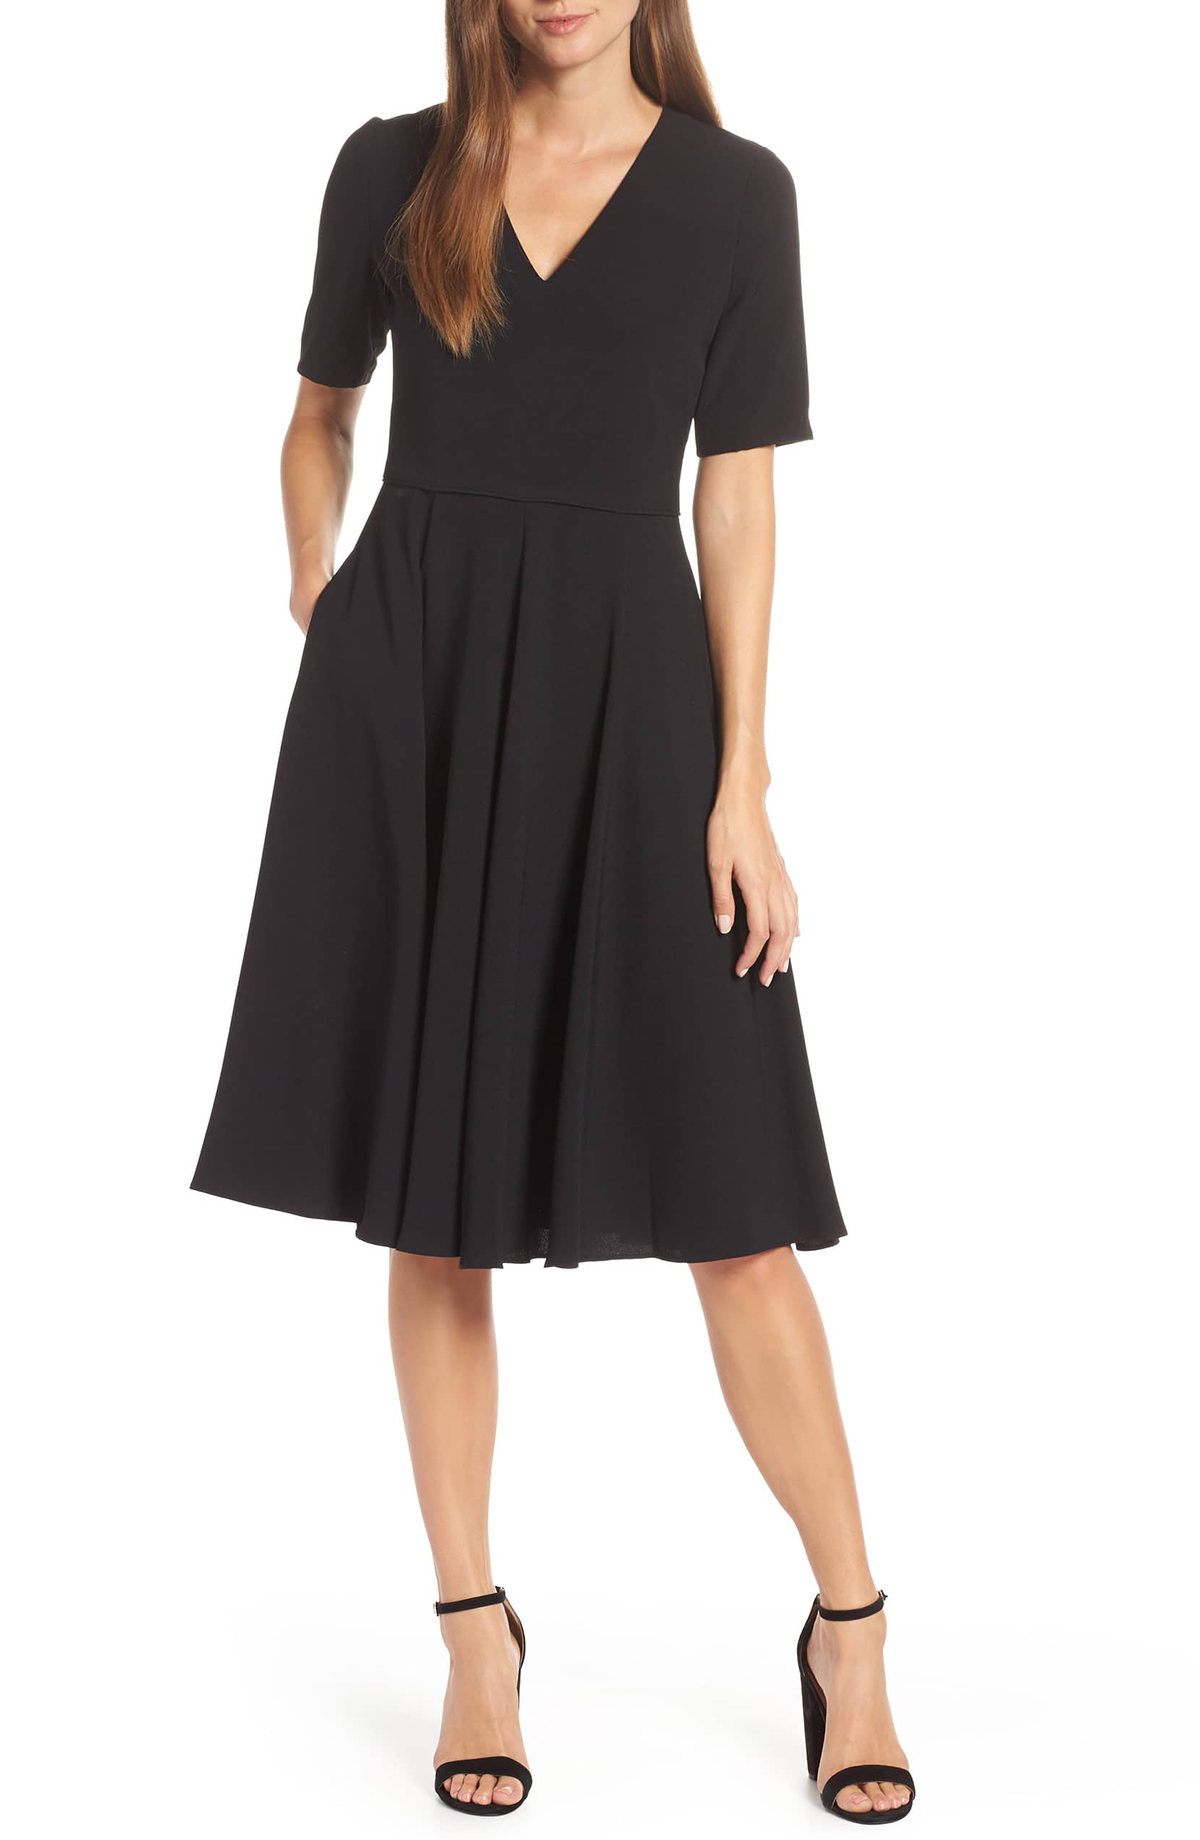 This Timeless Fit-and-Flare Dress Will Glam up Any Occasion